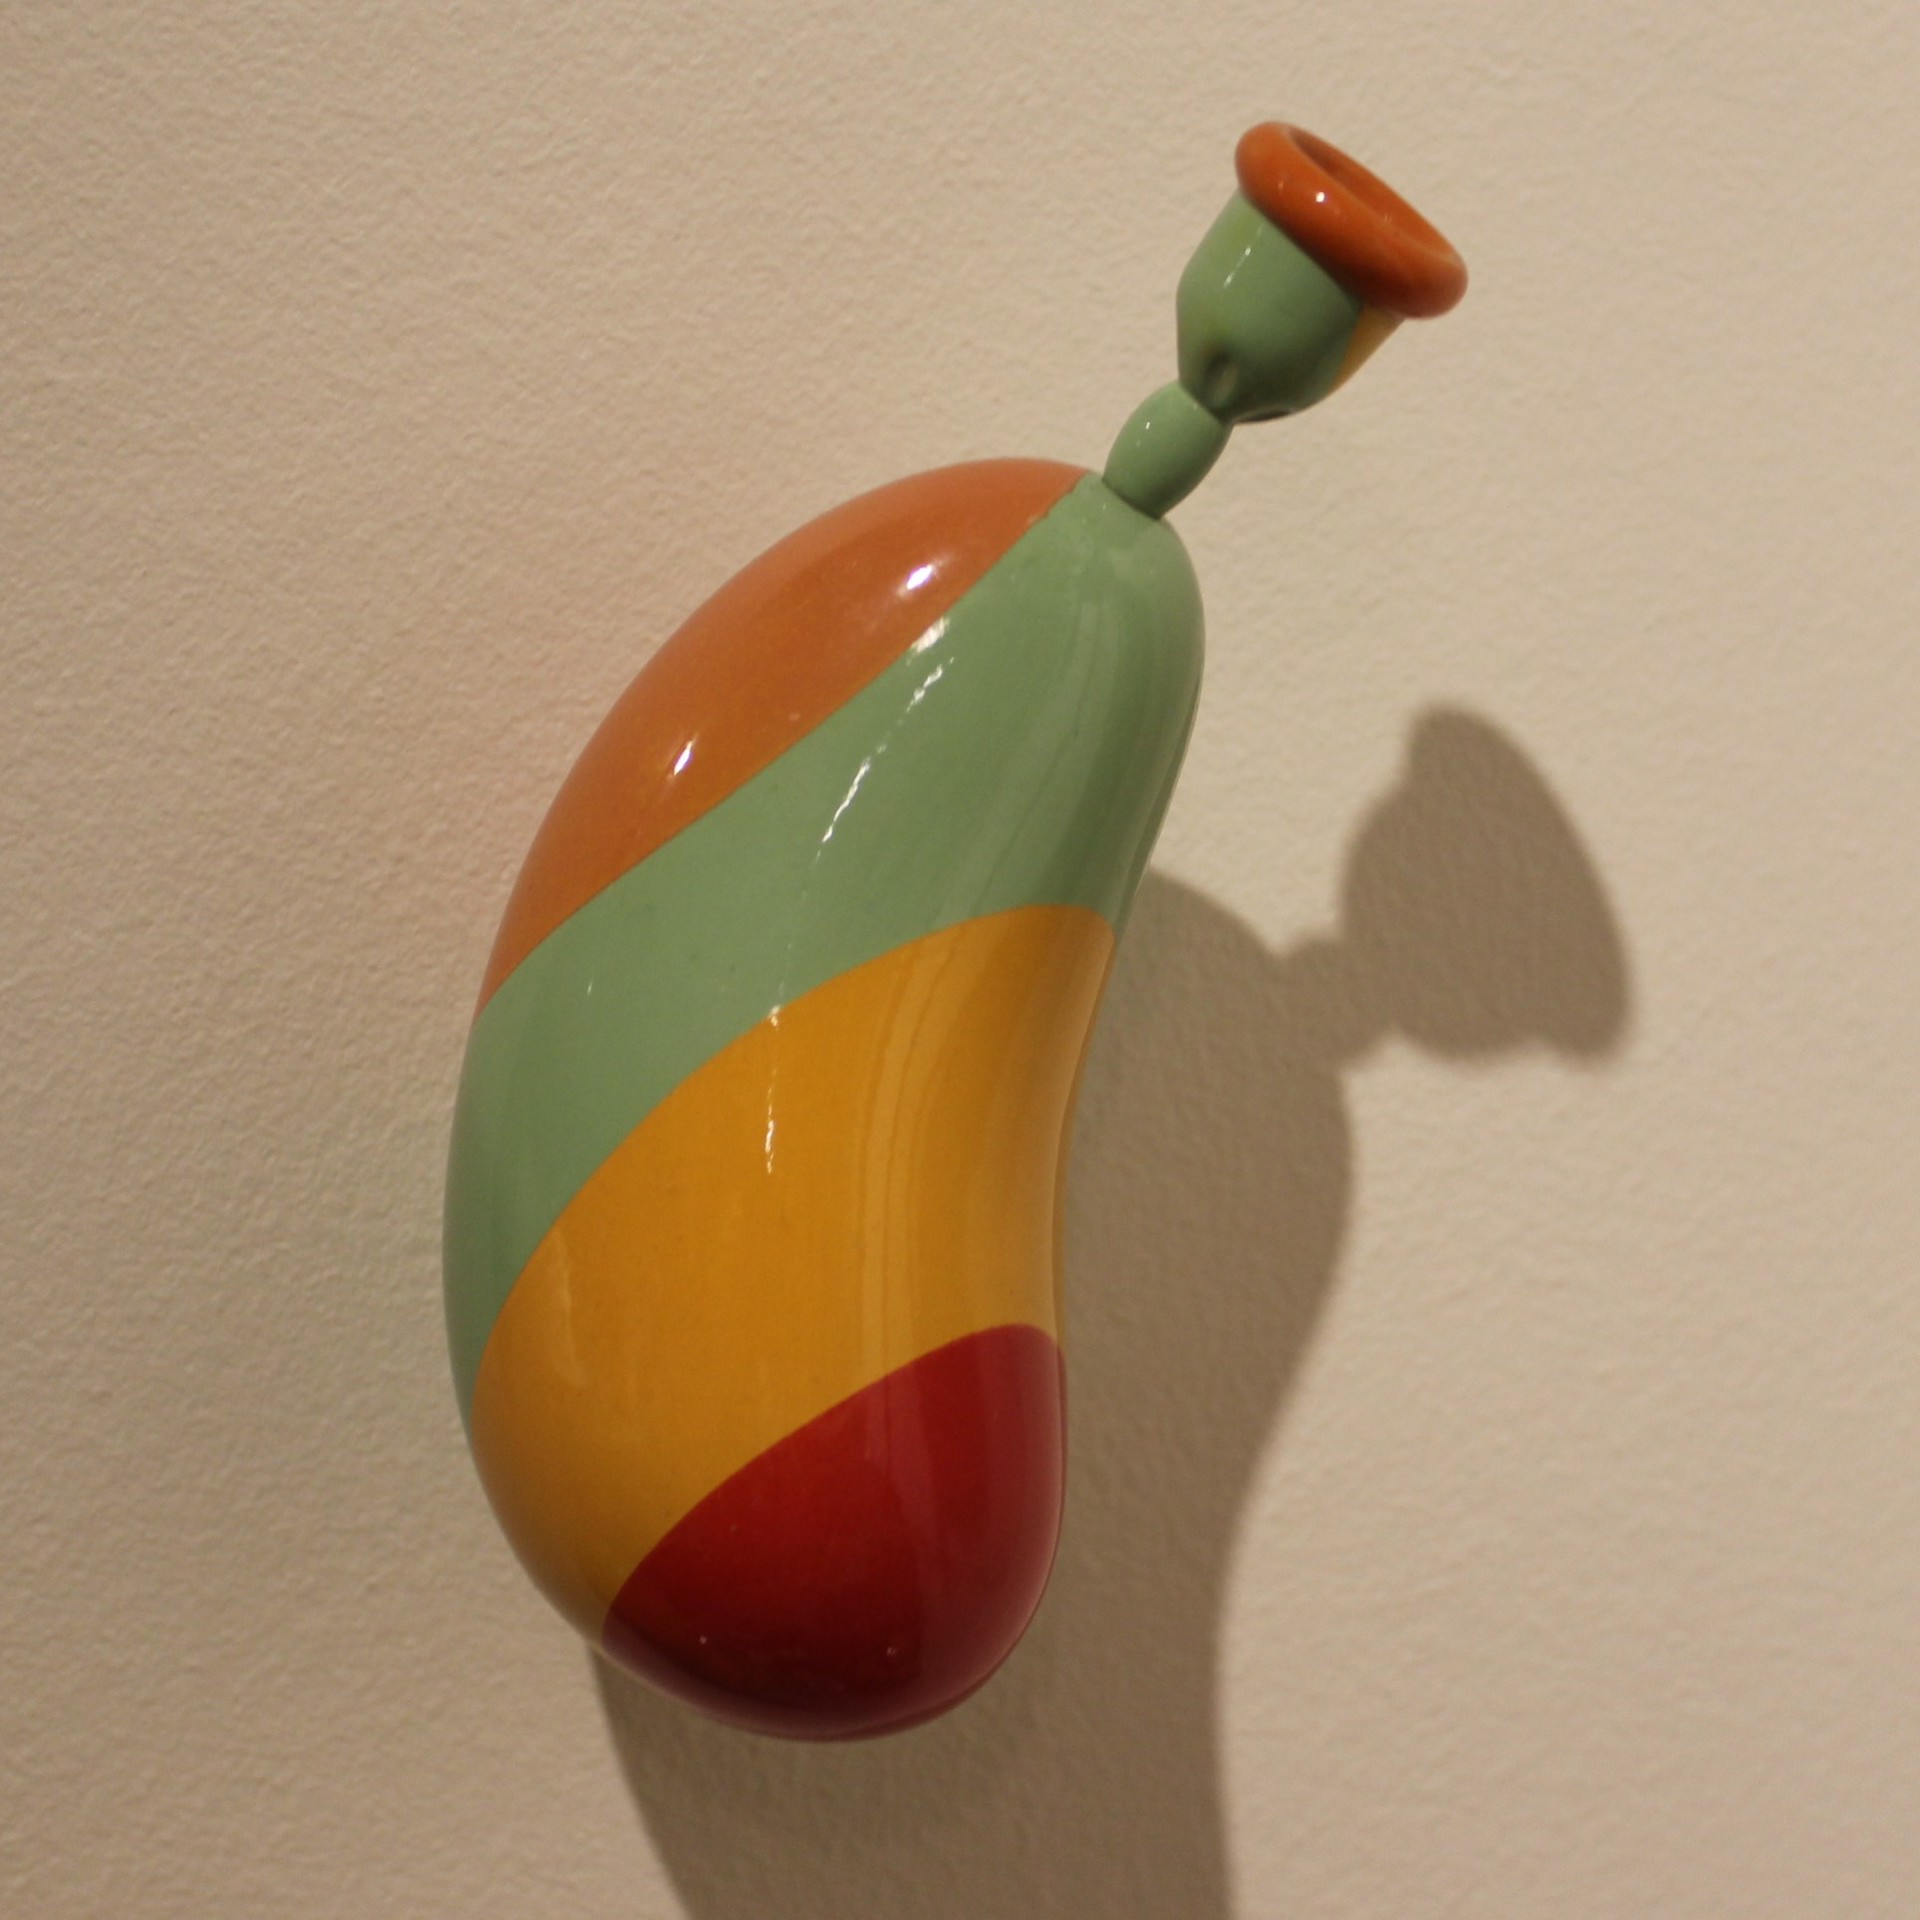 Small Balloon (orange, green, yellow, and red) by Sean O'Meallie